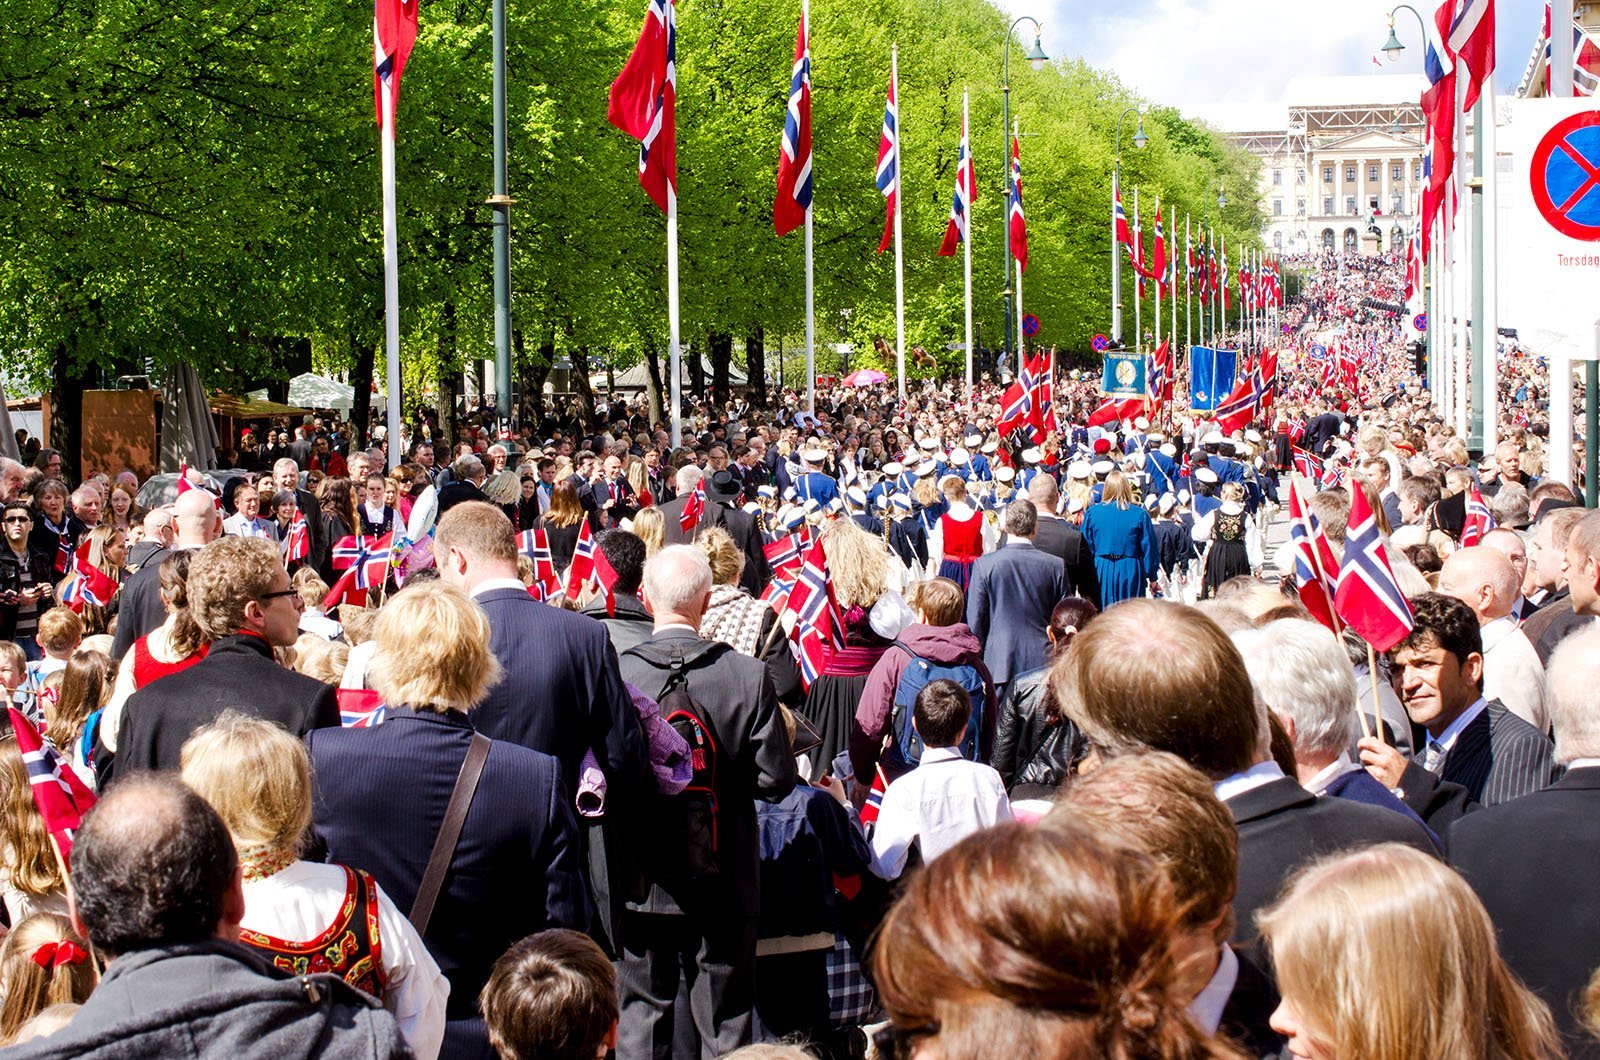 Norwegian National Foundation Day: What to expect on May 17th this year